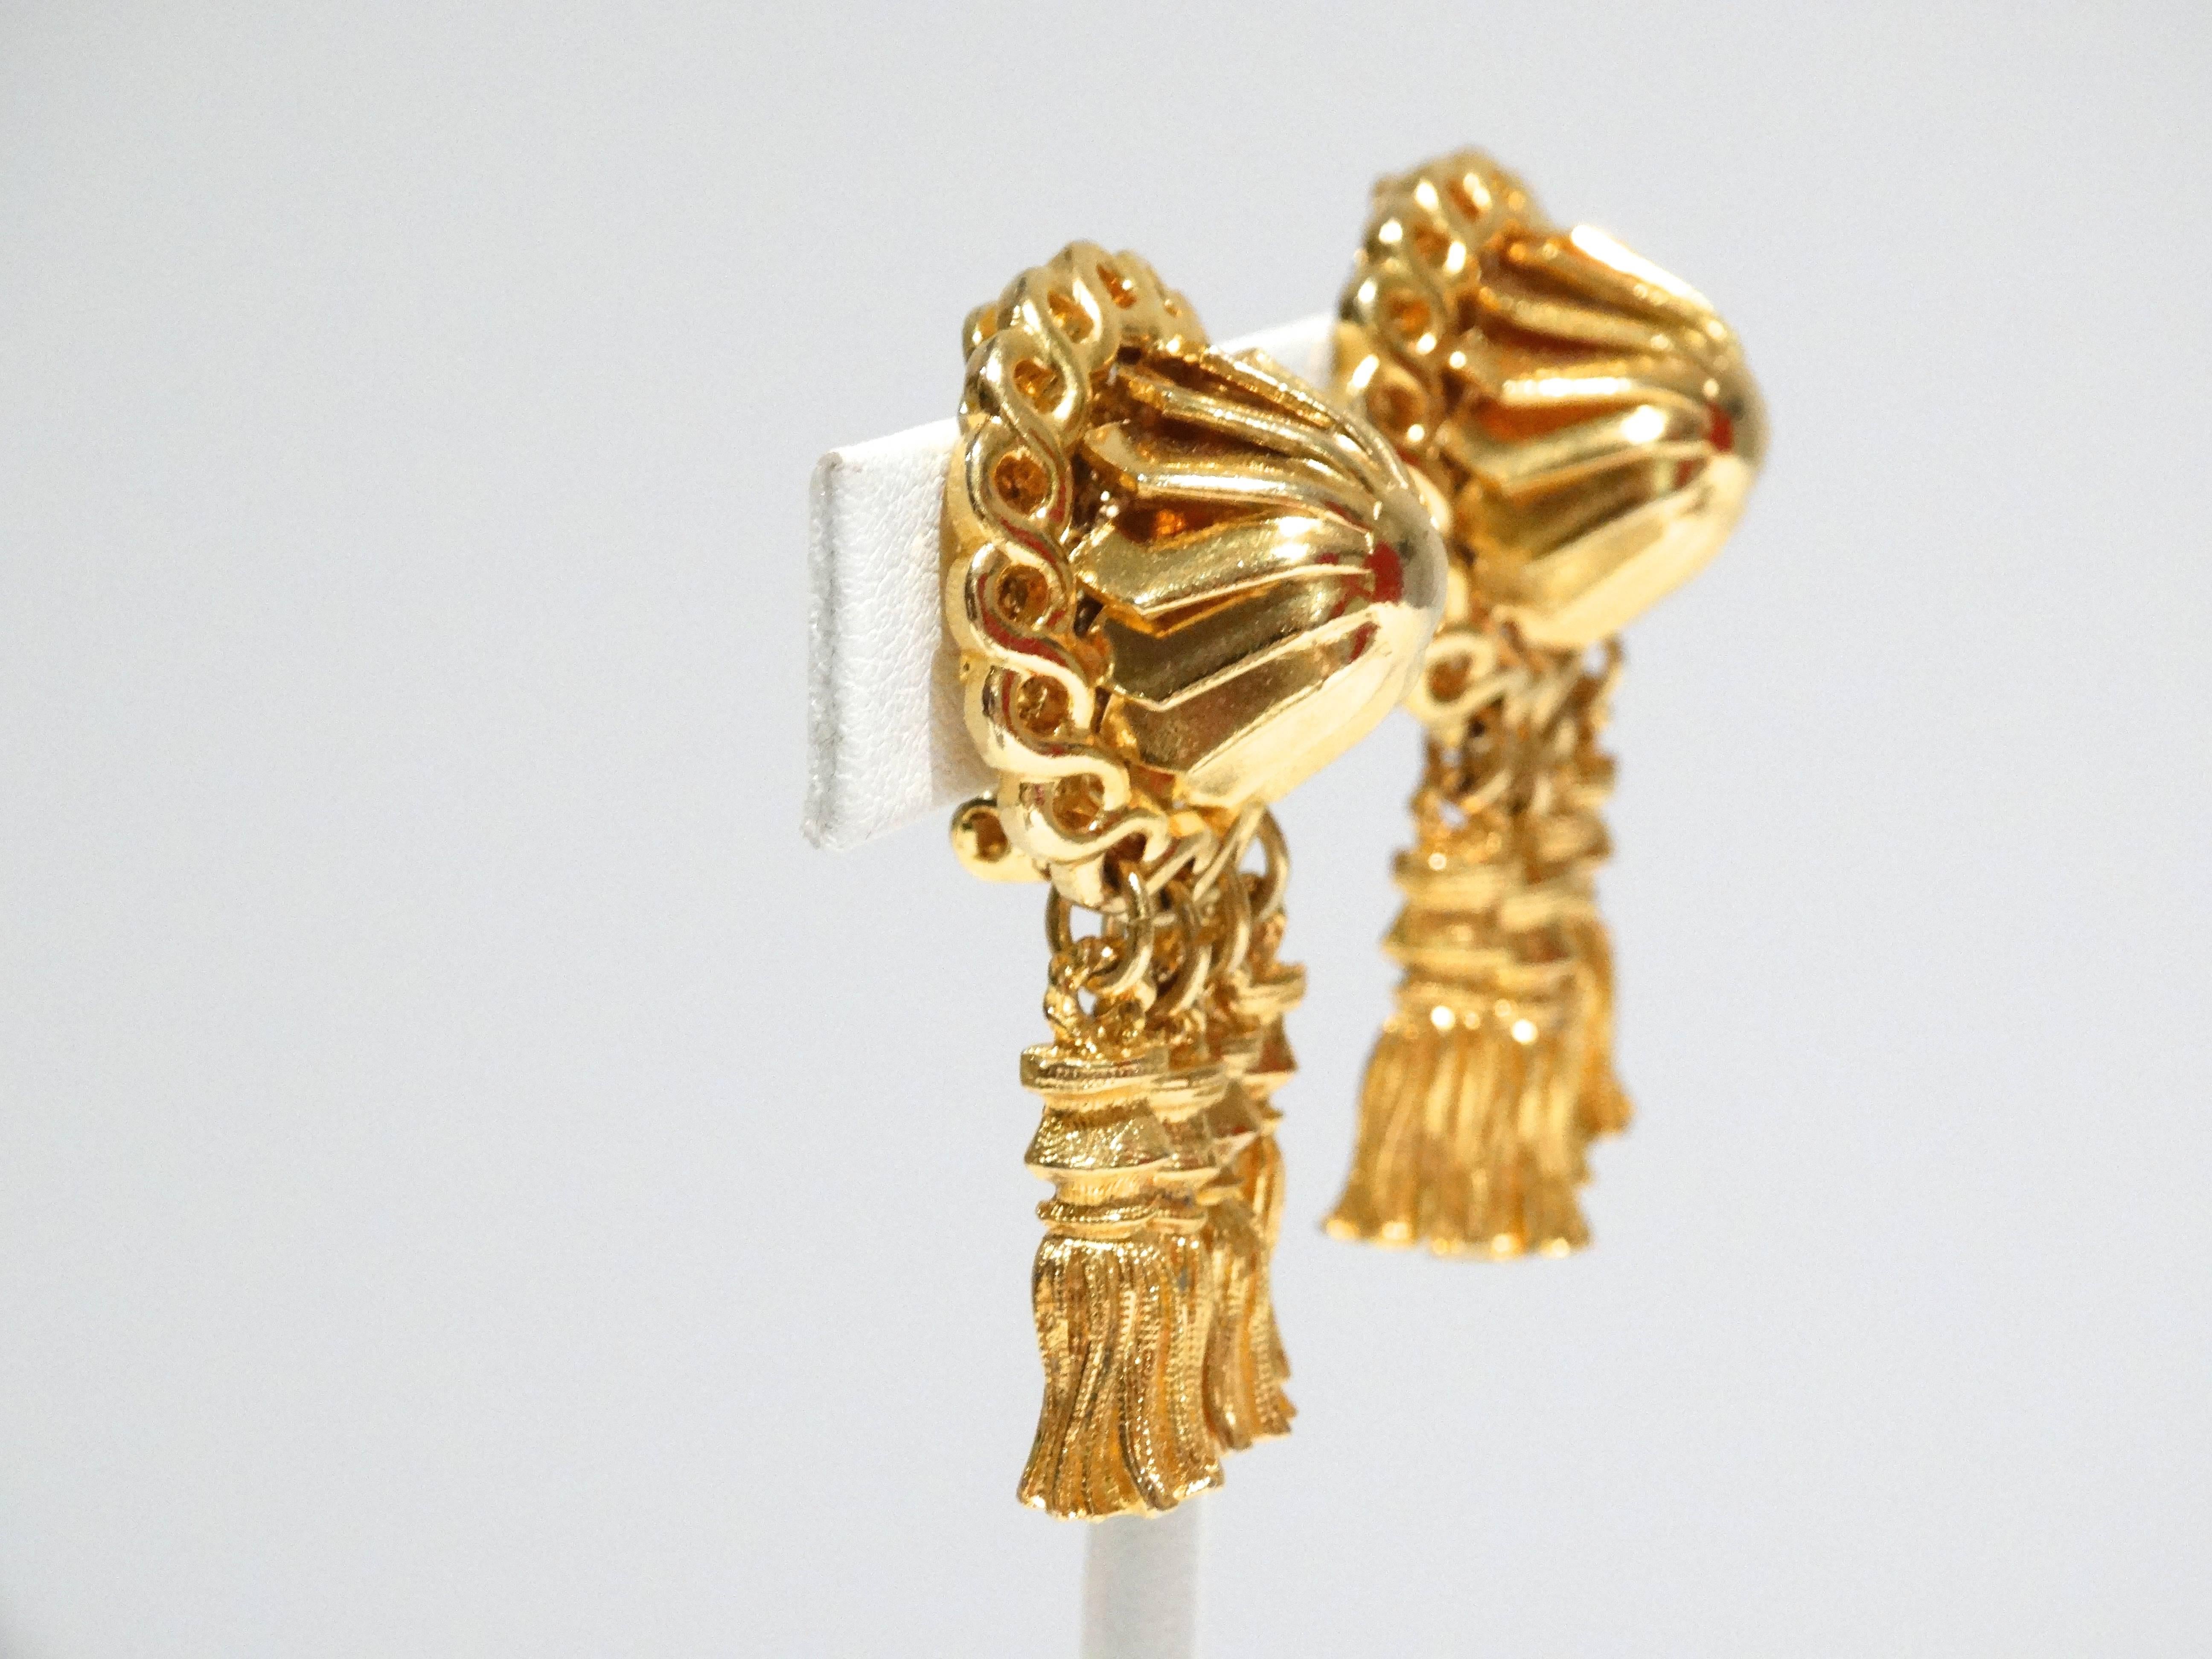 1970's item by William de Lillo. This is a beautiful pair of studded clip tassel earrings all in gold gilt with a heavy linked gold-tone chain edge. Perfect to wear as your everyday earring. The gold is a vibrant in color.  The earrings are 2.5